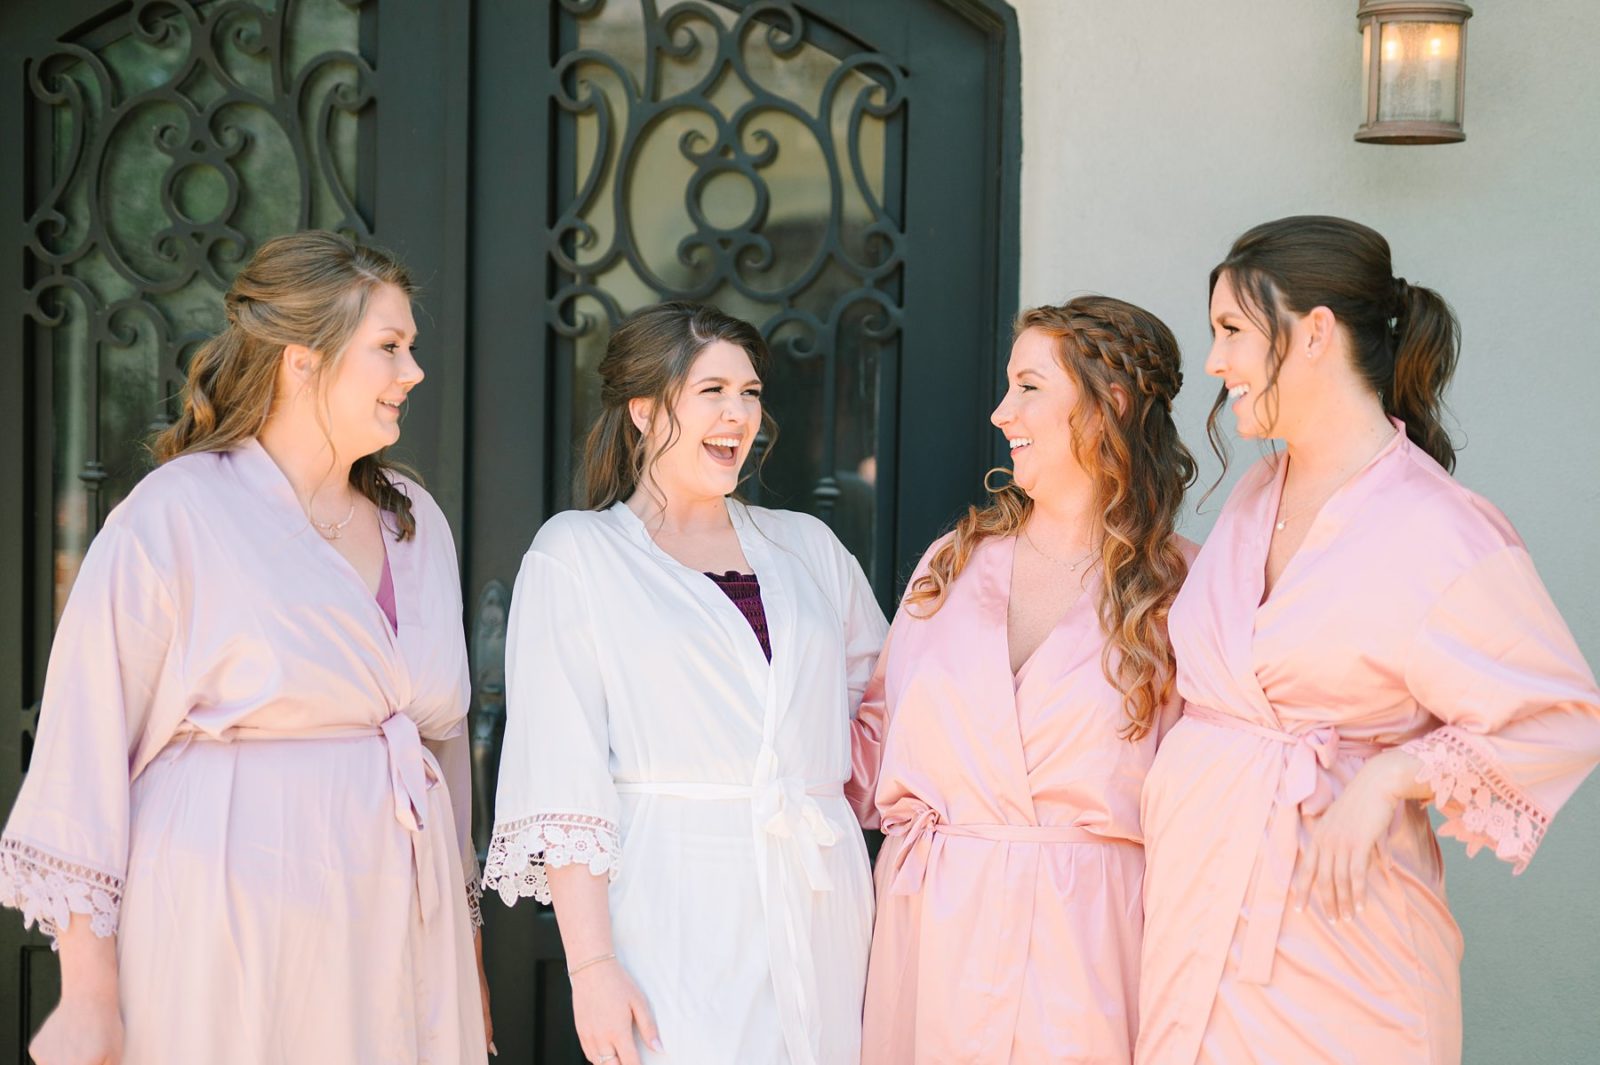 bride and bridesmaids laughing, bride laughing, bride getting ready, austin wedding, tuscan hall, chapel dulcinea wedding venues, tuscan hall and veranda room, tuscan hall wedding venue, austin wedding, austin wedding photography, hill country wedding, unique austin wedding venue, veranda room, chapel dulcinea, wizards guest room, wizard academy wedding venue, free austin wedding venue